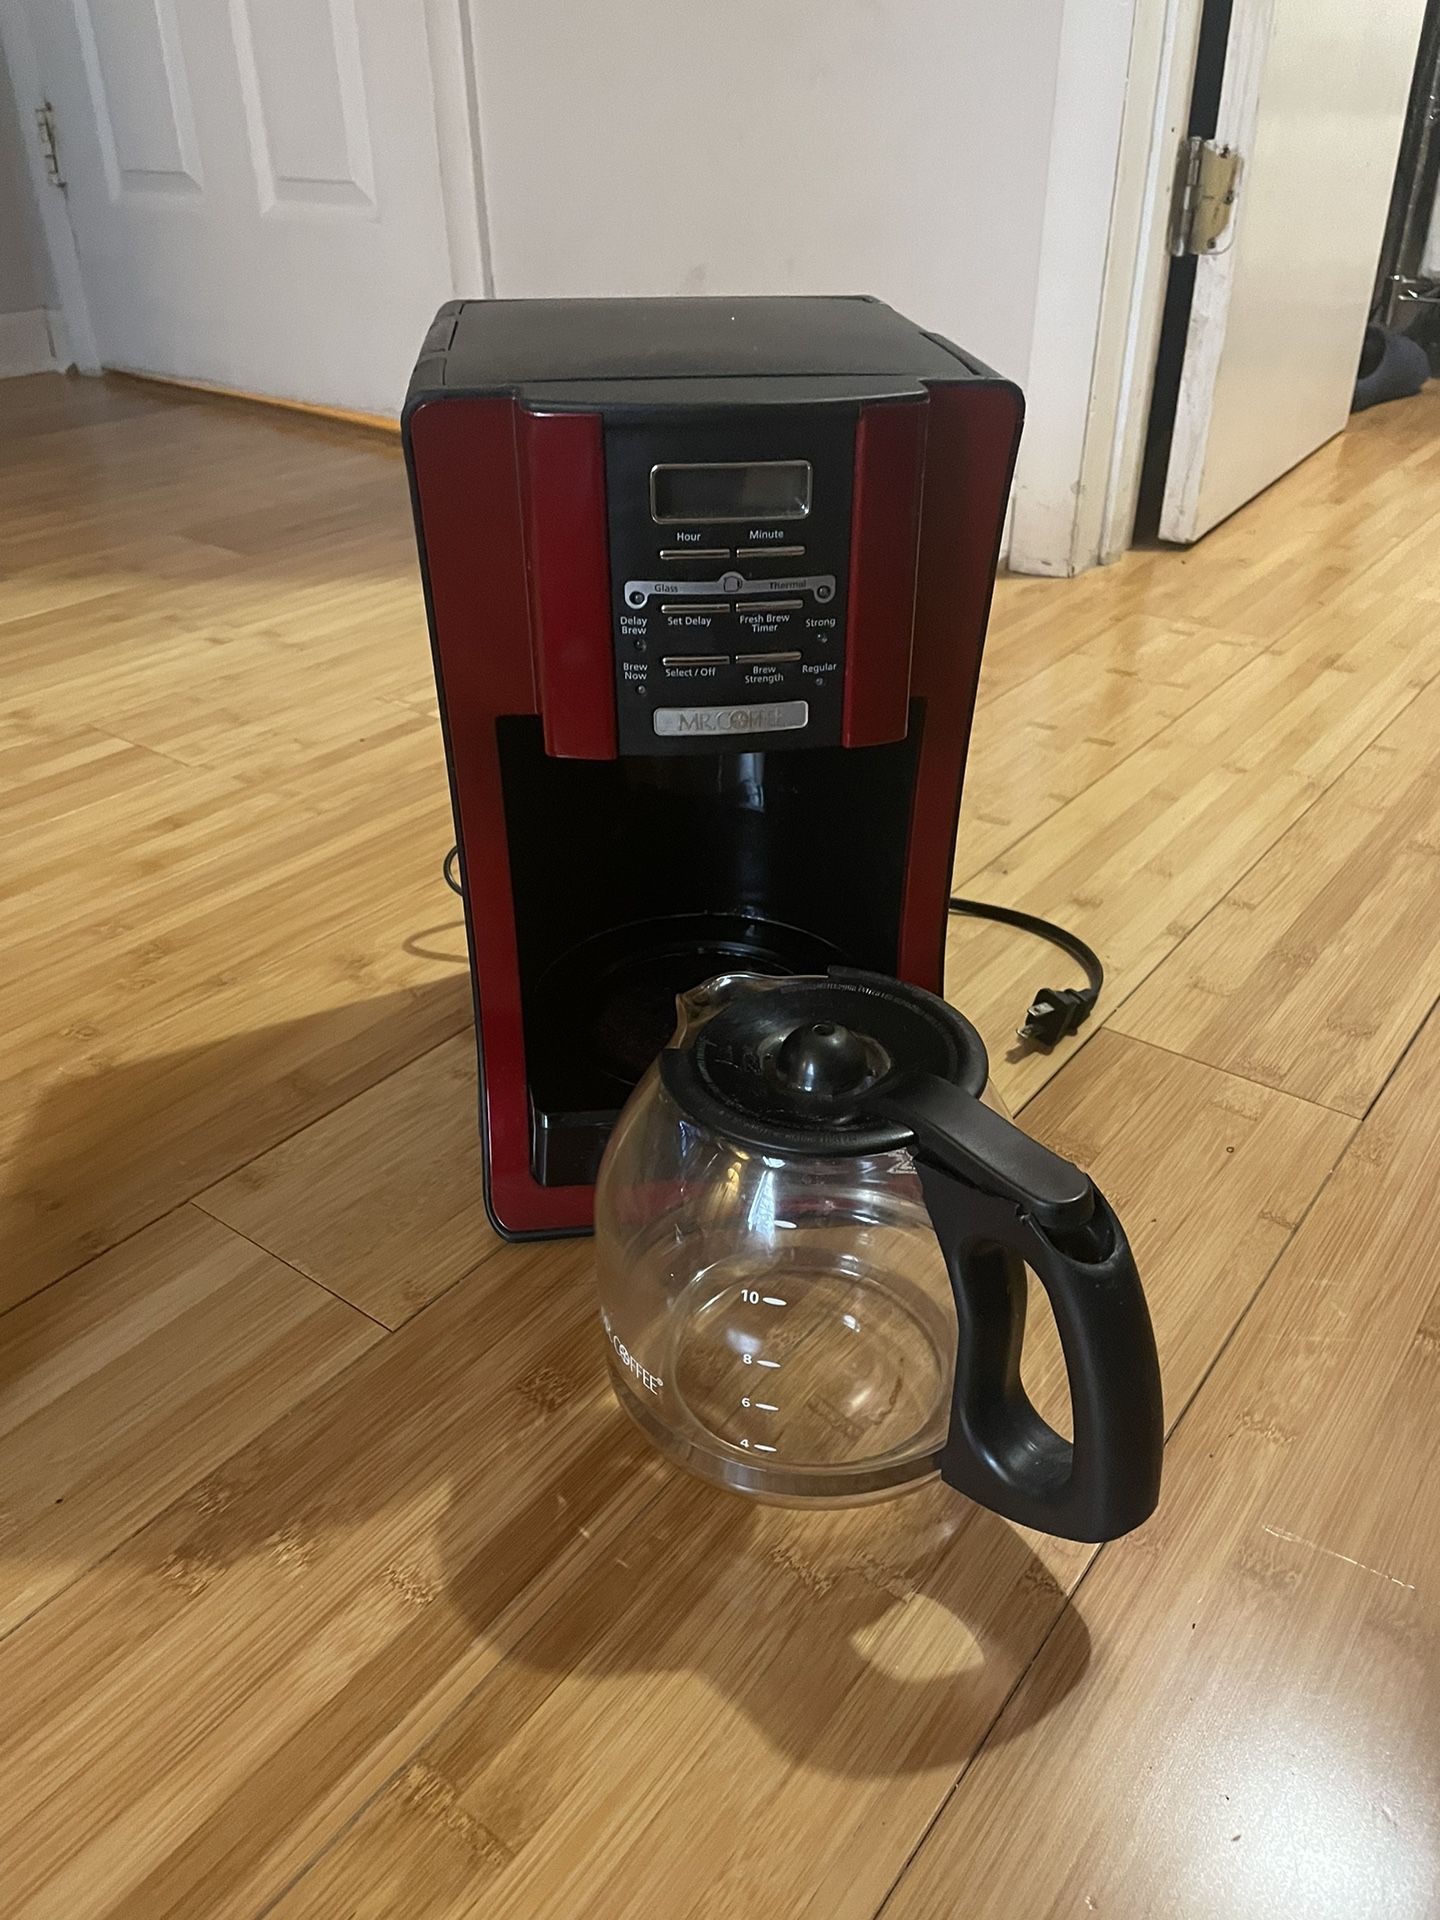 Mr. Coffee Cafe Frappe Maker BVMC-FM1 Automatic Frozen Coffee Machine for  Sale in Clifton, NJ - OfferUp